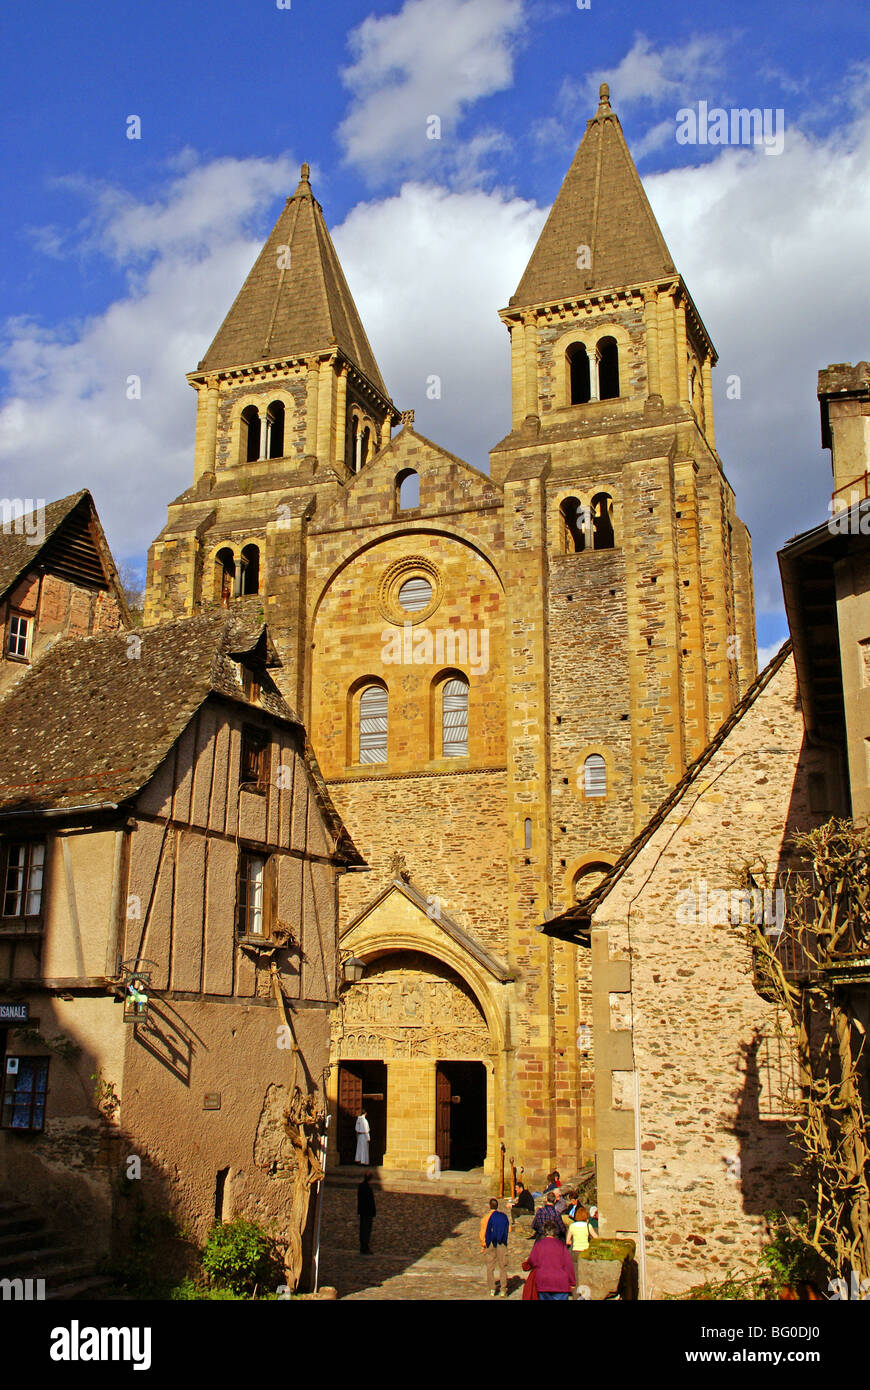 The old pilgrimage town of Conques in France, and the Abbey Church of Sainte Foy. Stock Photo